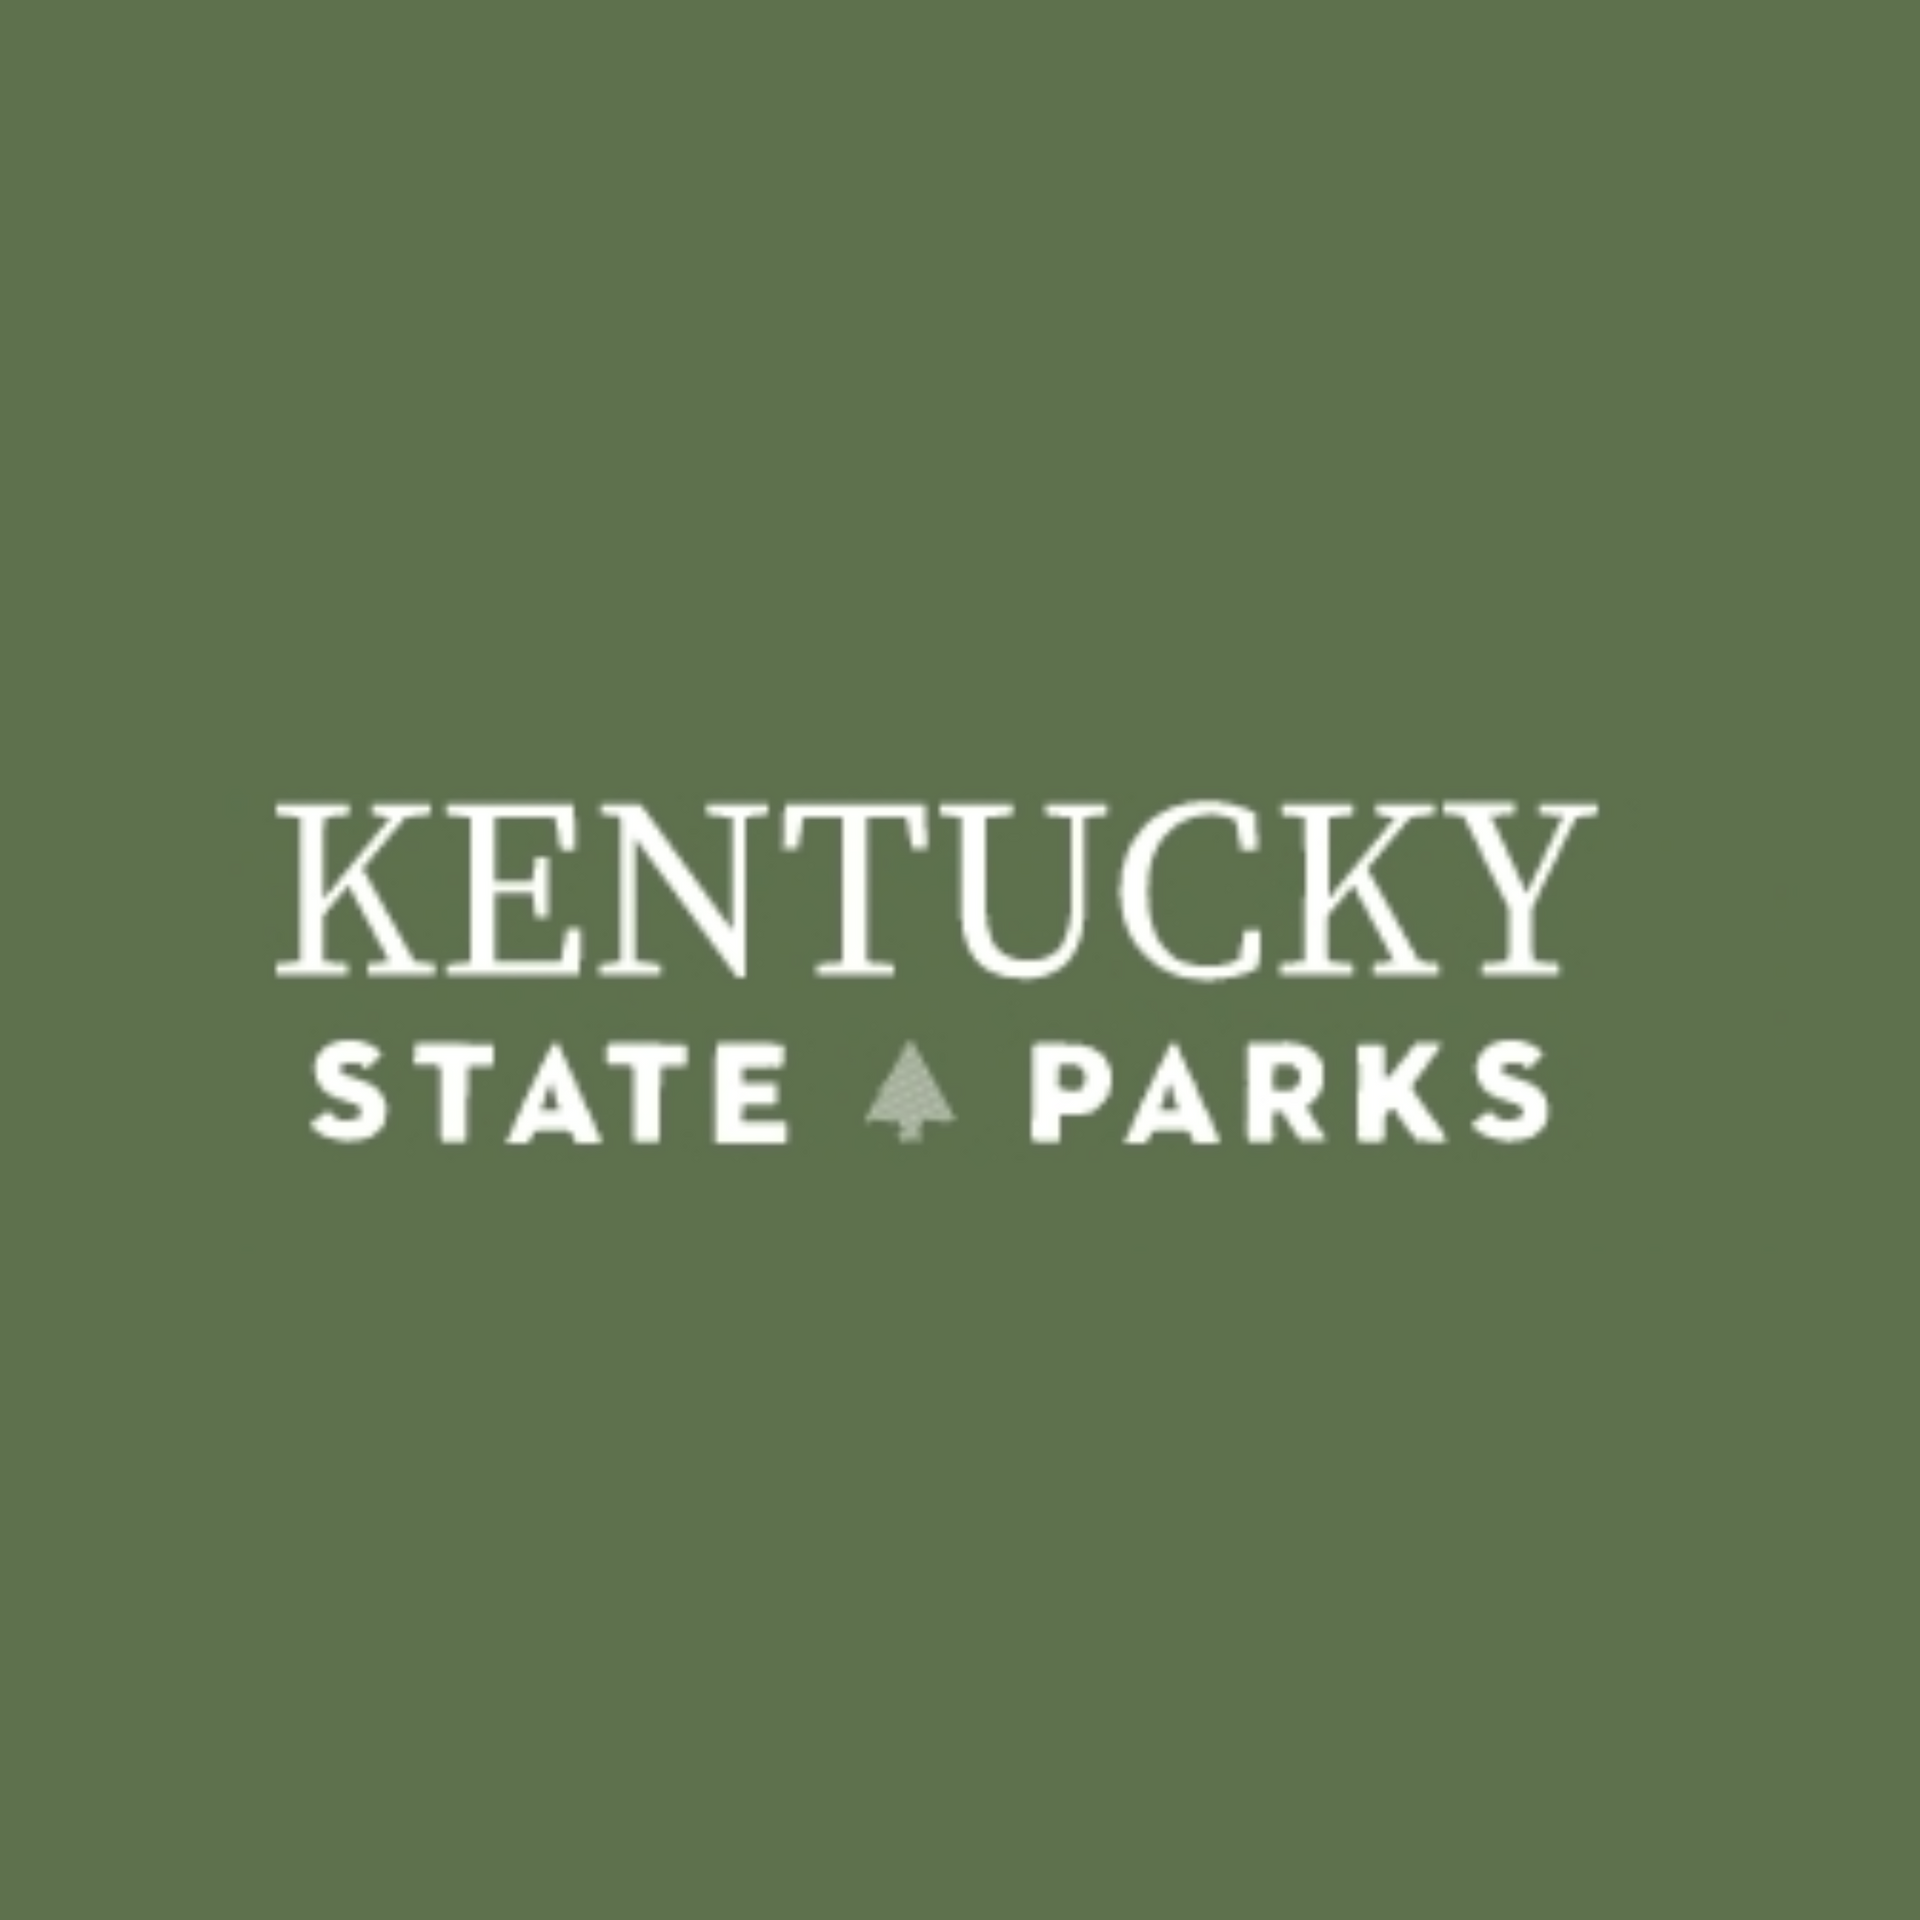 kentucky state parks logo on a green background